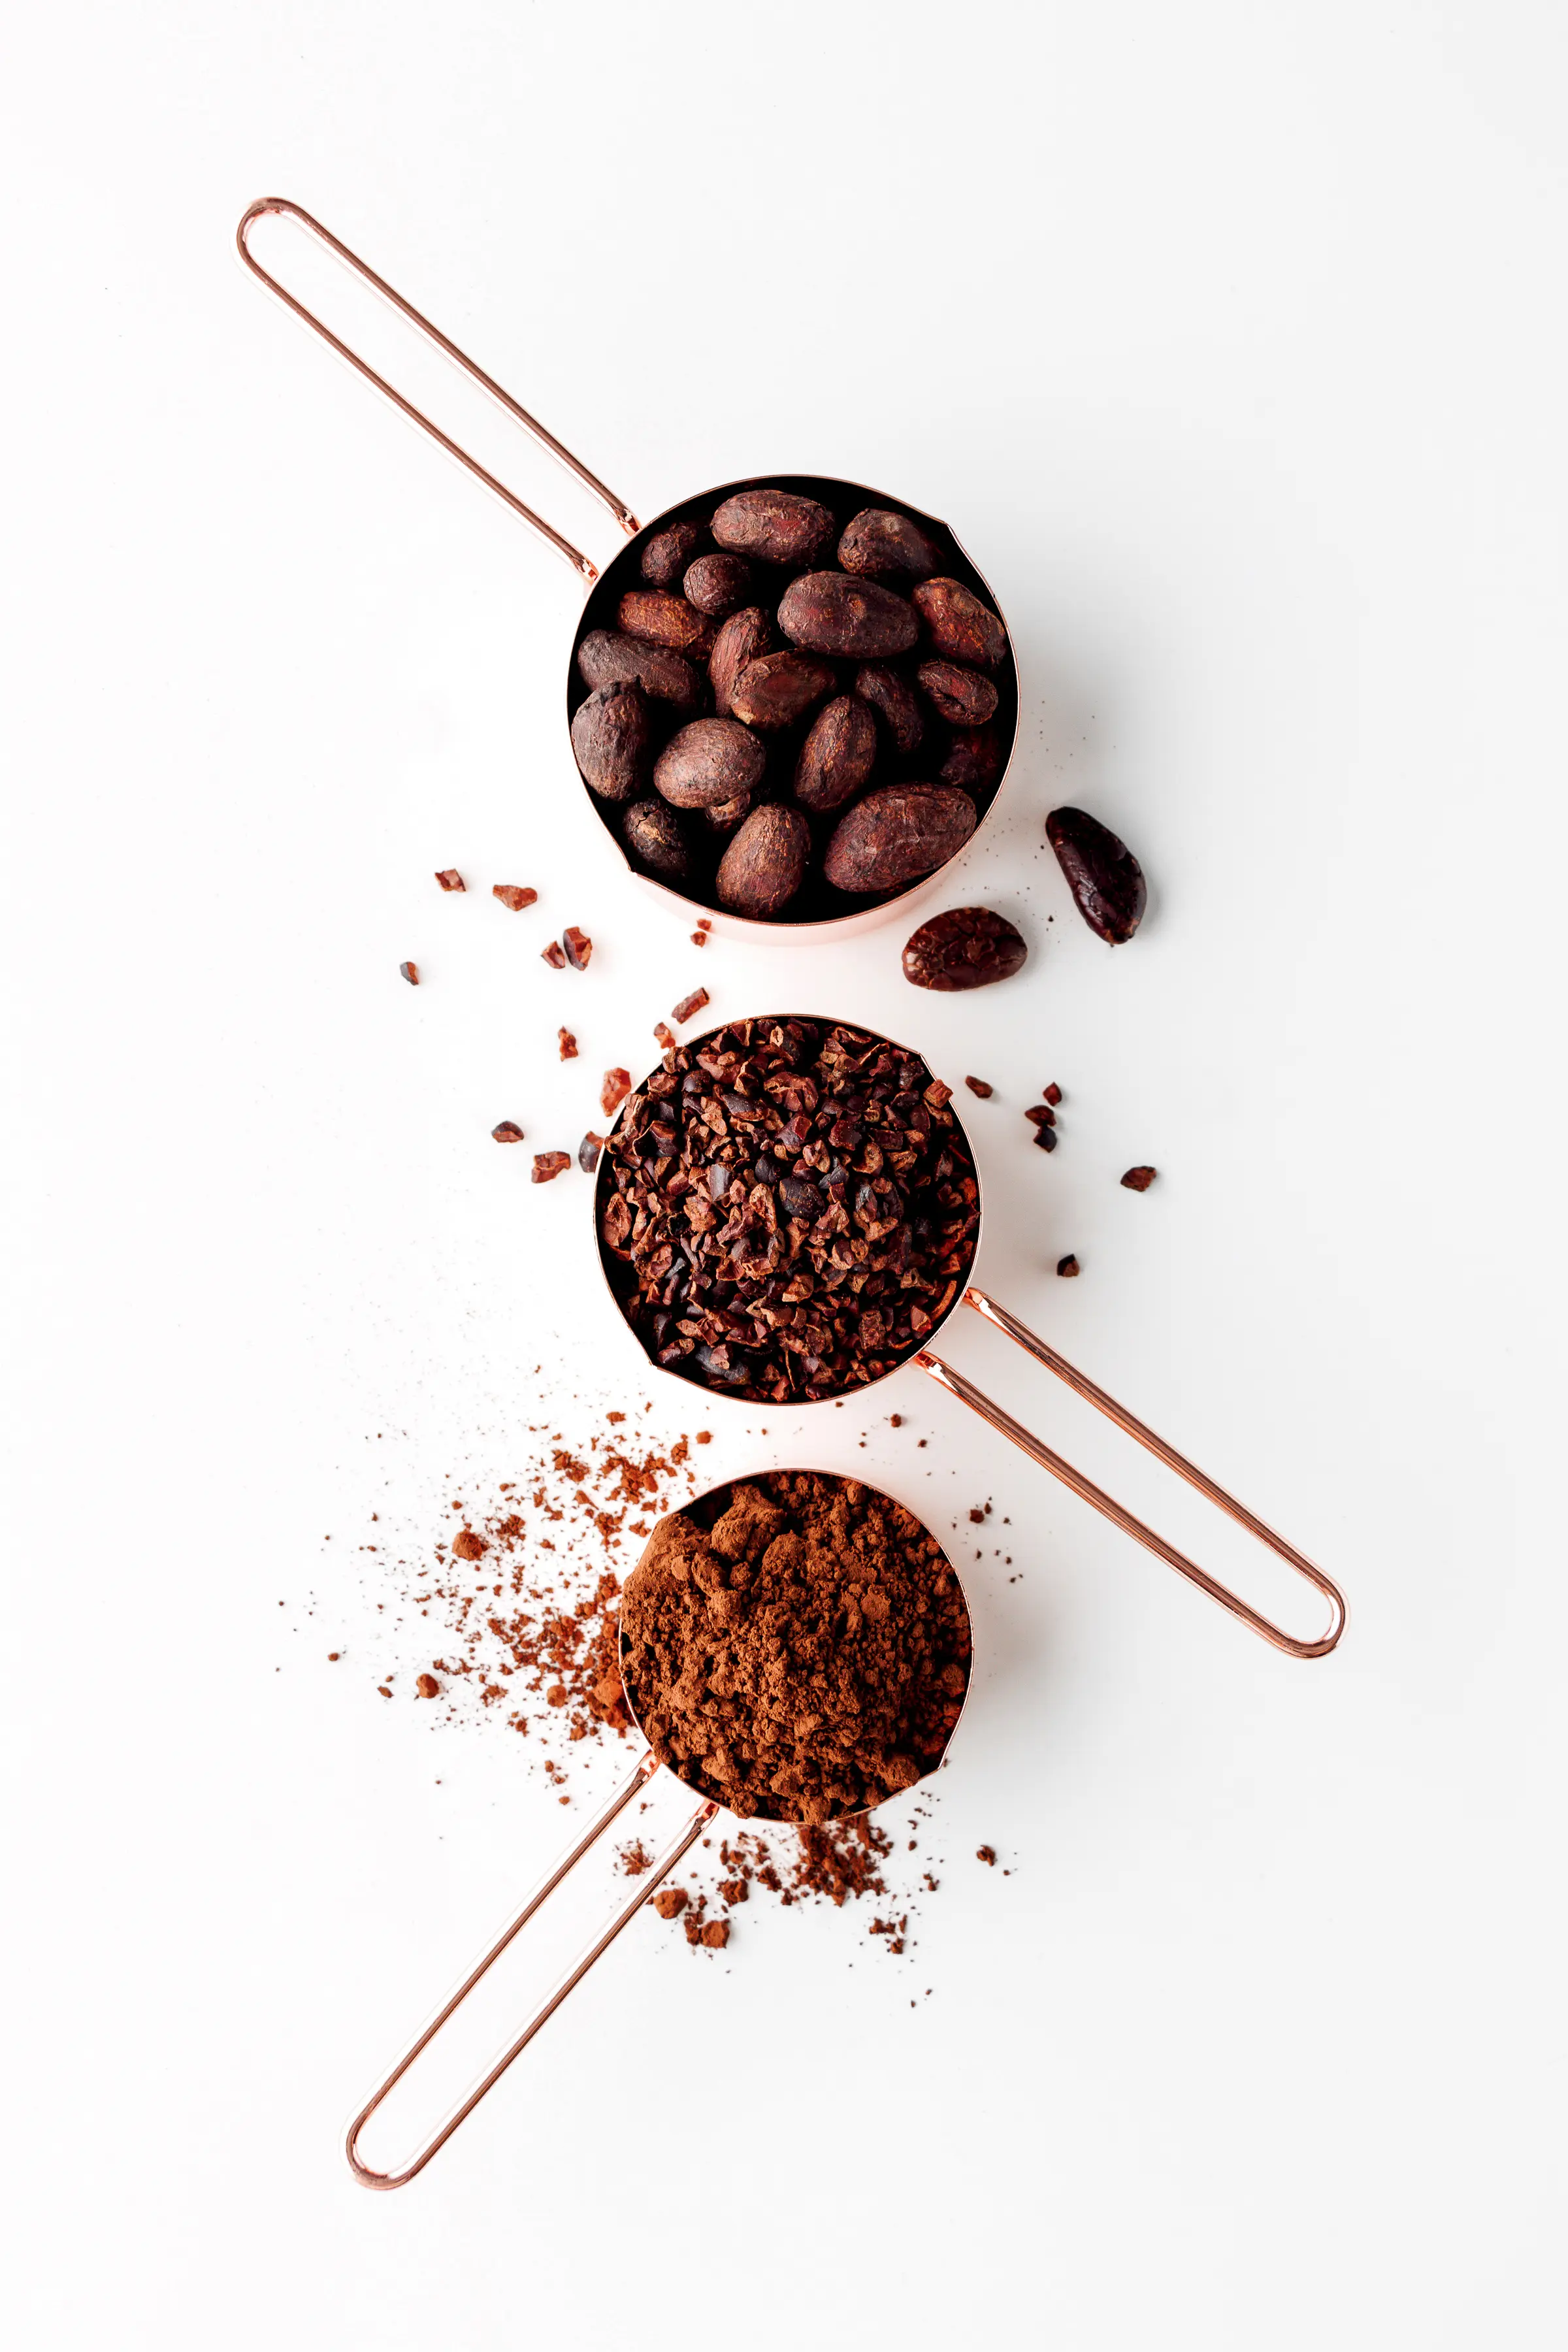 Three measuring cups with cocoa powder, cocoa nibs and cocoa beans on a bright white tabletop. 